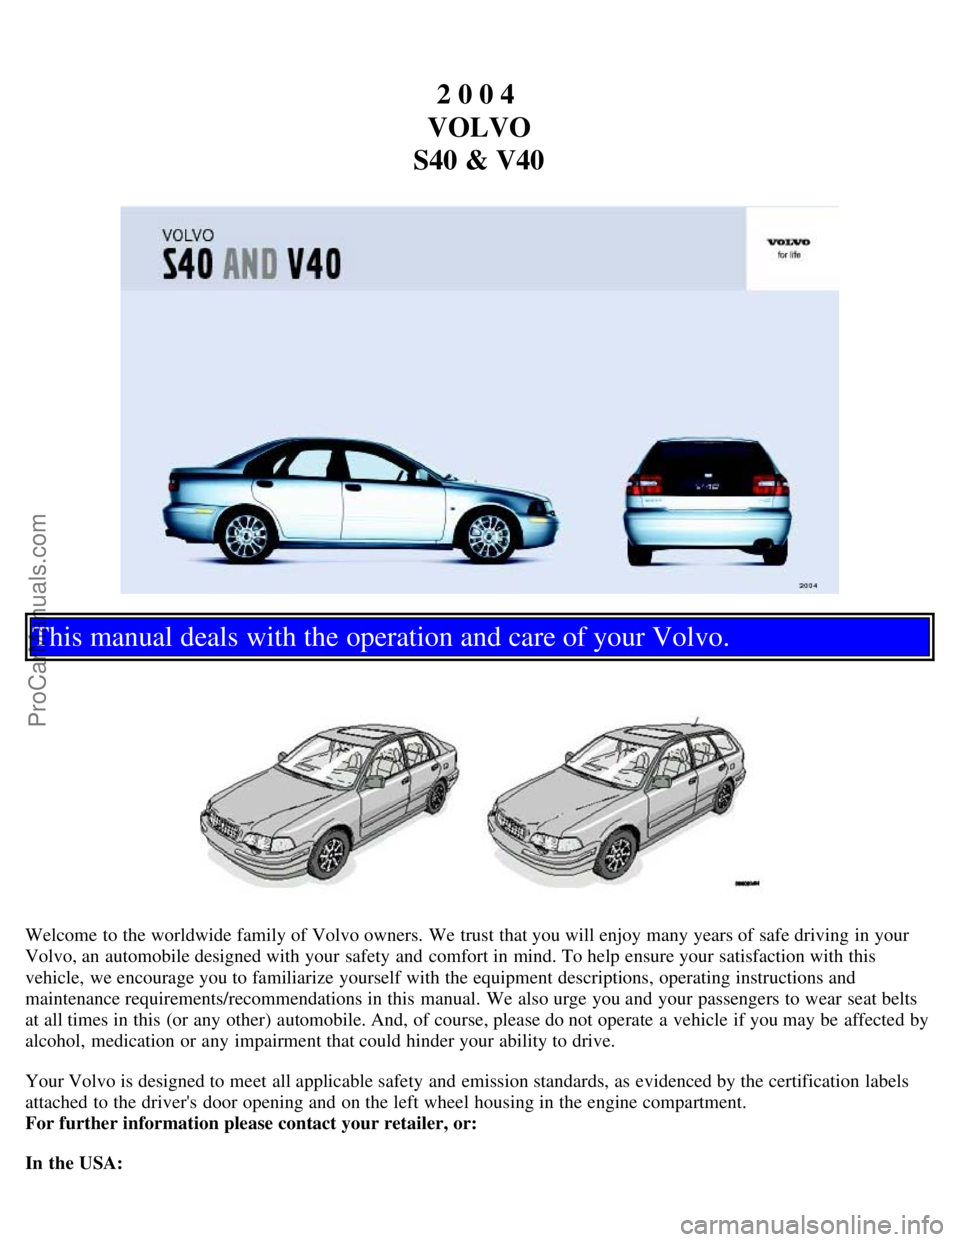 VOLVO S40 2004  Owners Manual 2 0 0 4 
VOLVO
S40 & V40
This manual deals with the operation and care of your Volvo.
Welcome to the worldwide family of Volvo owners. We trust that you will enjoy many years of safe driving in your
V